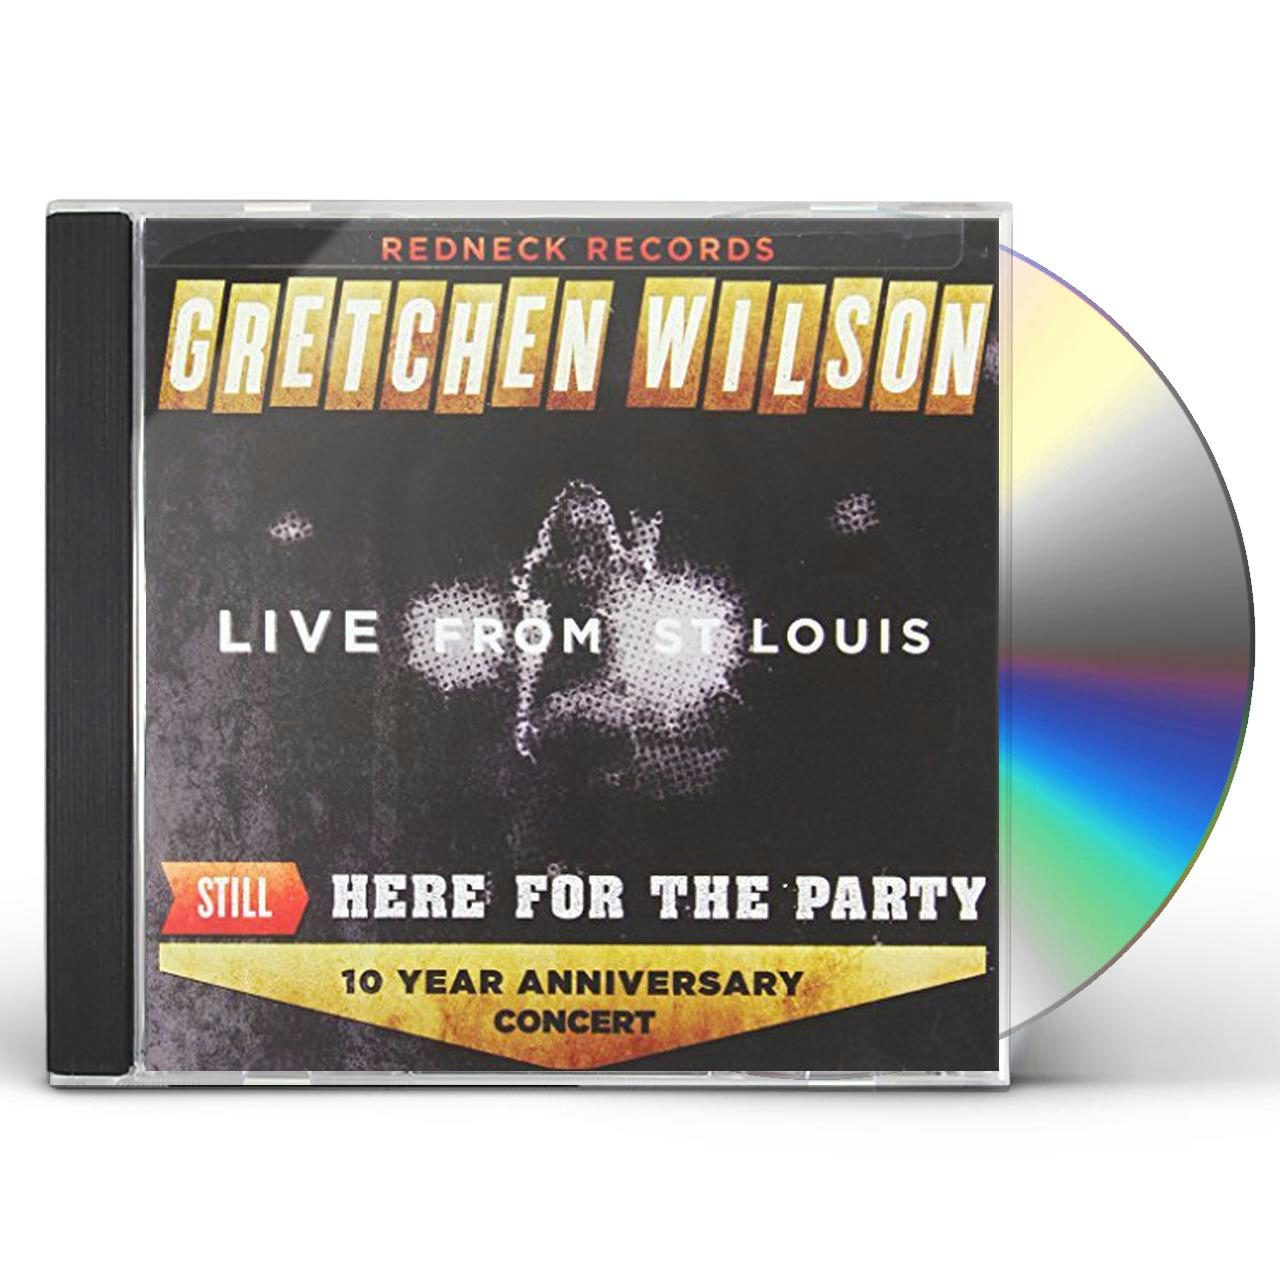 Gretchen Wilson STILL HERE FOR THE PARTY CD